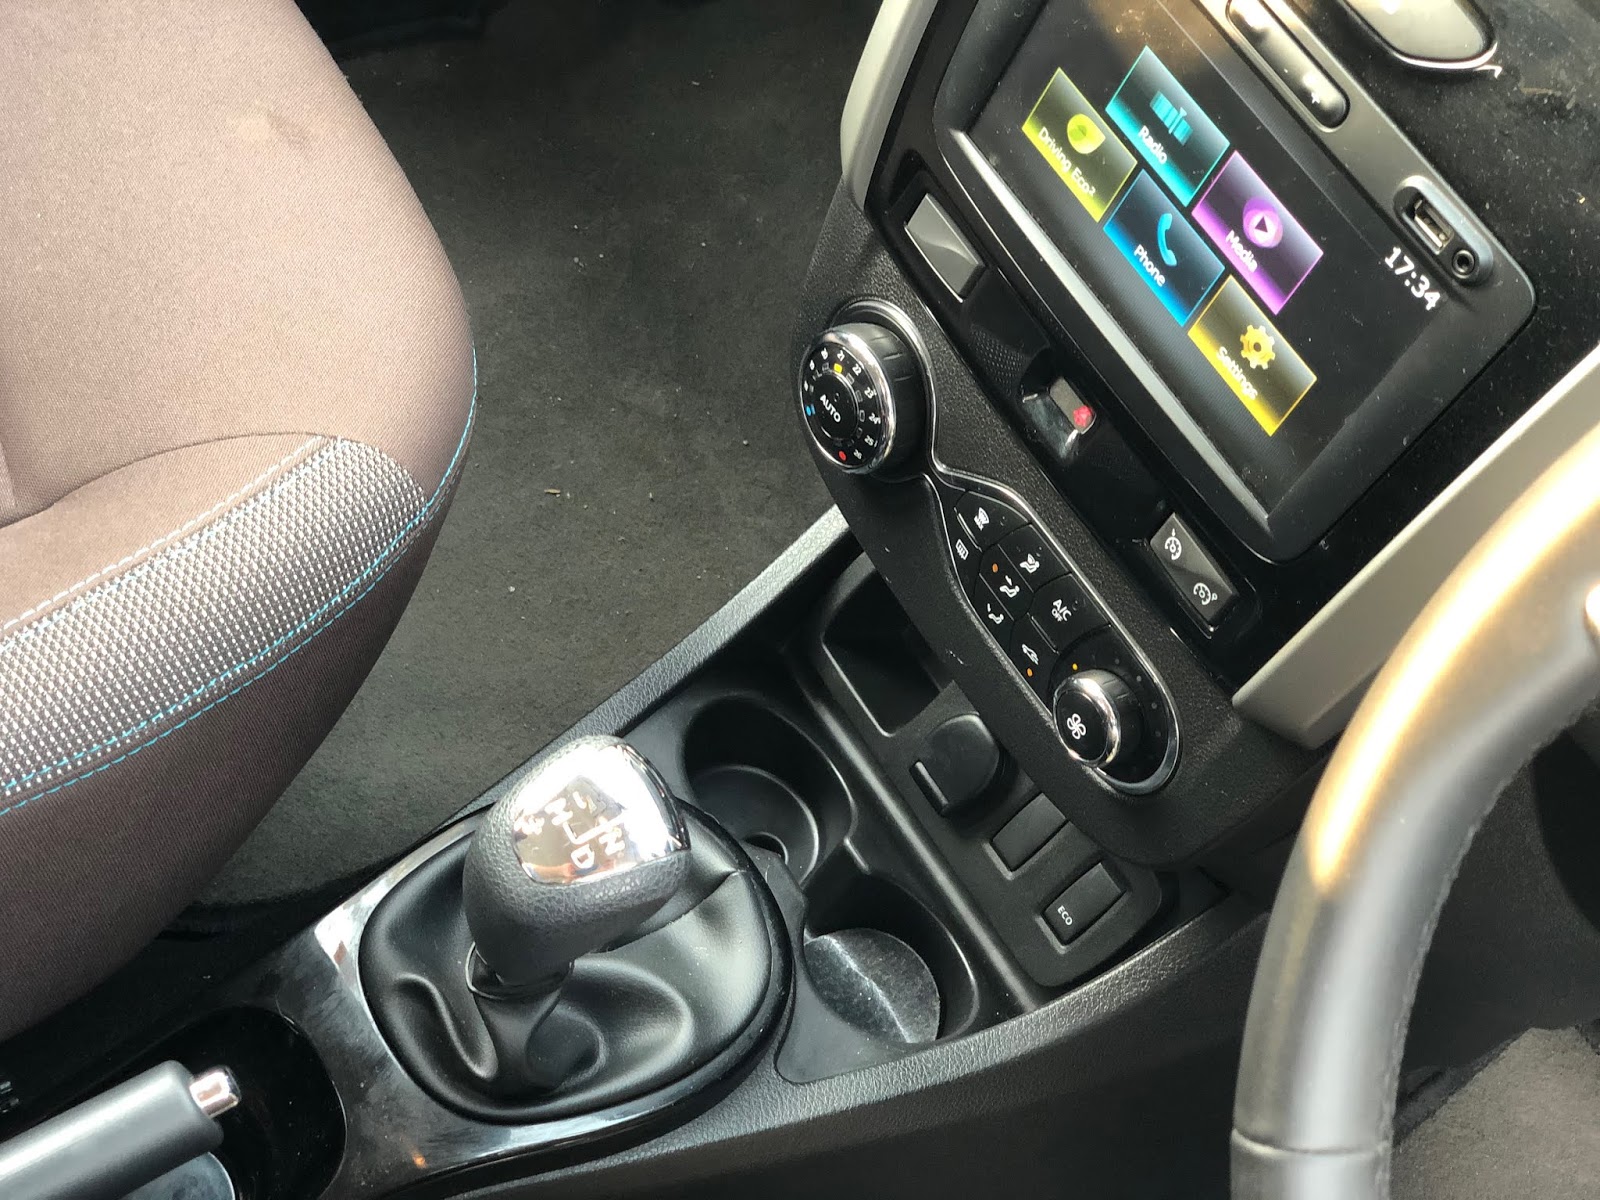 Interiors of the Renault Duster RXZ 110PS AMT dCi Easy-R variant